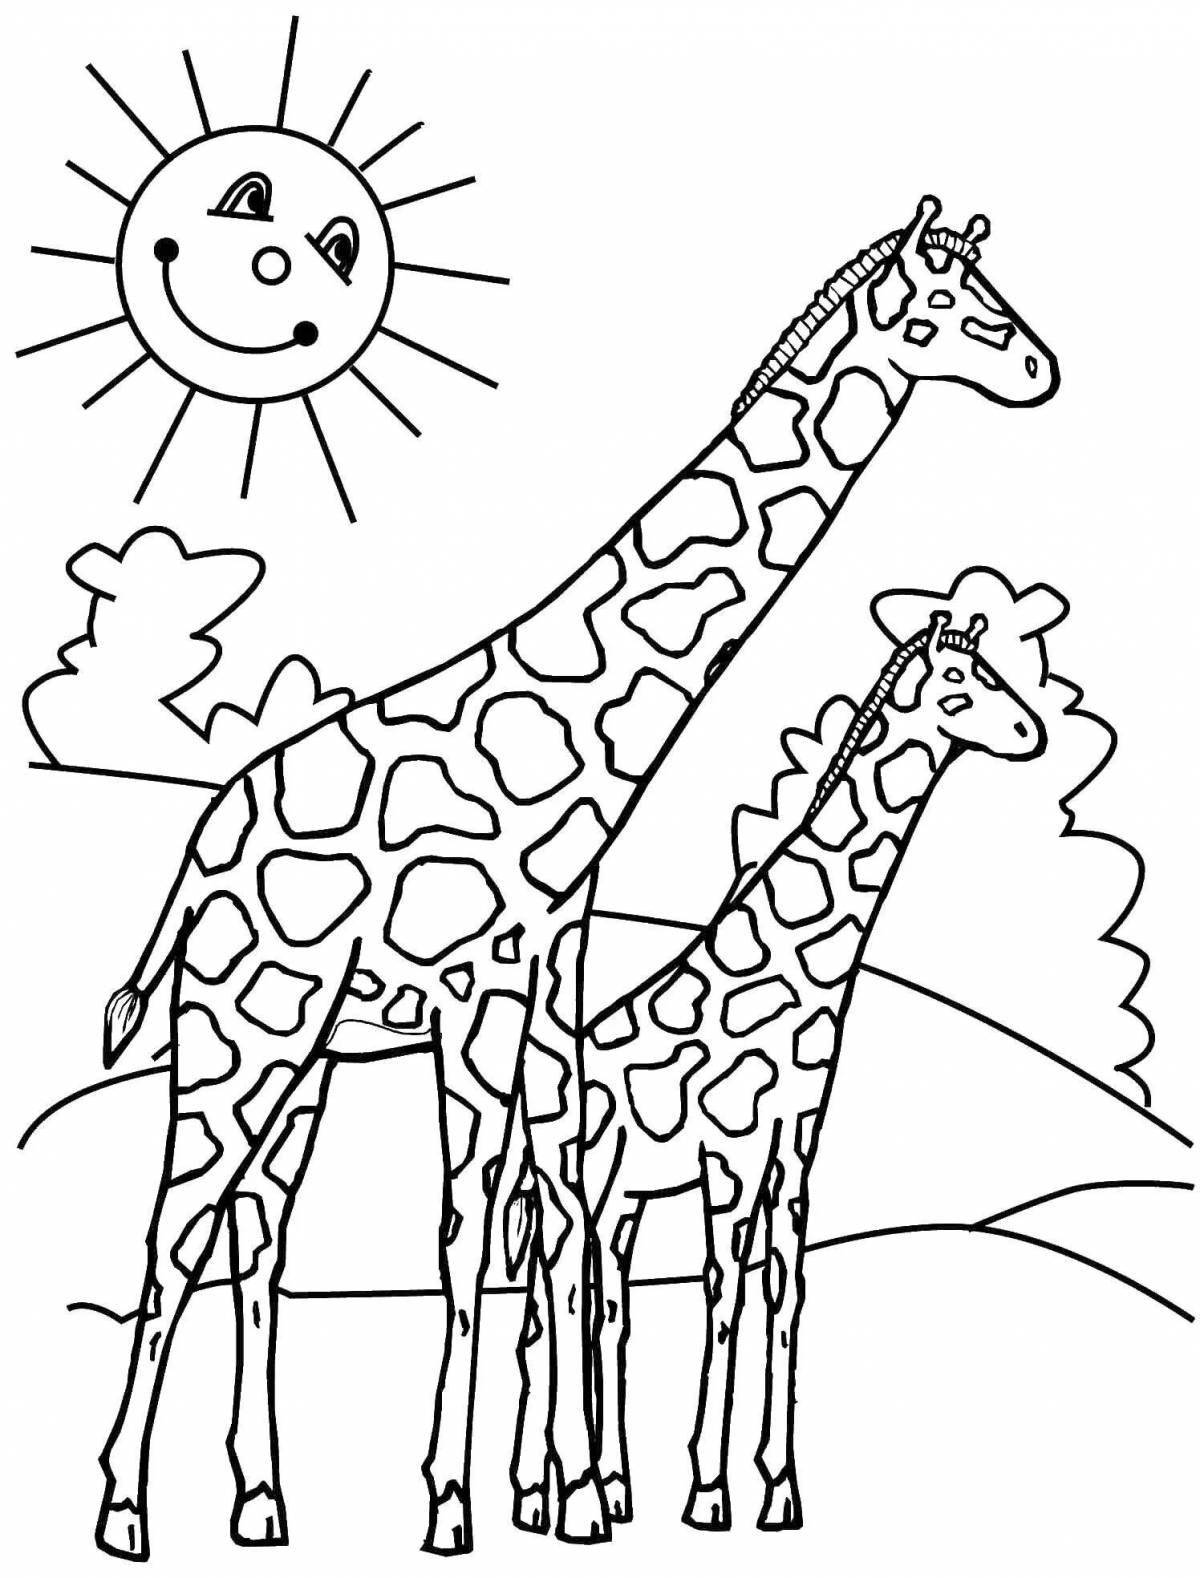 Awesome giraffe coloring page